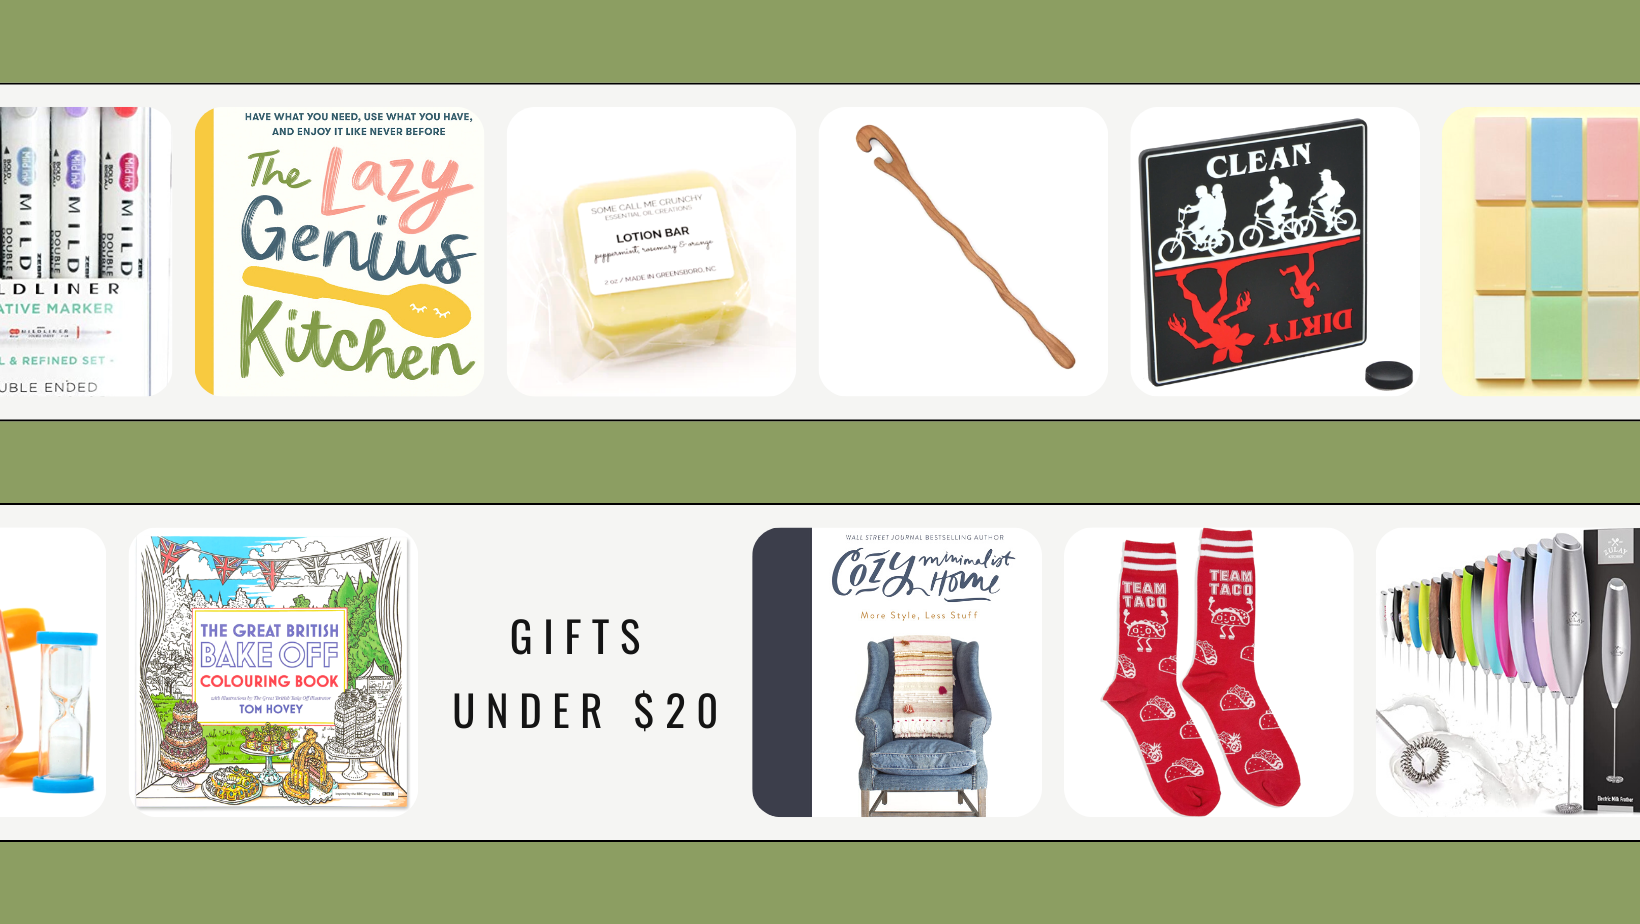 Gifts for Your Girls Under $30 - Collectively Carolina